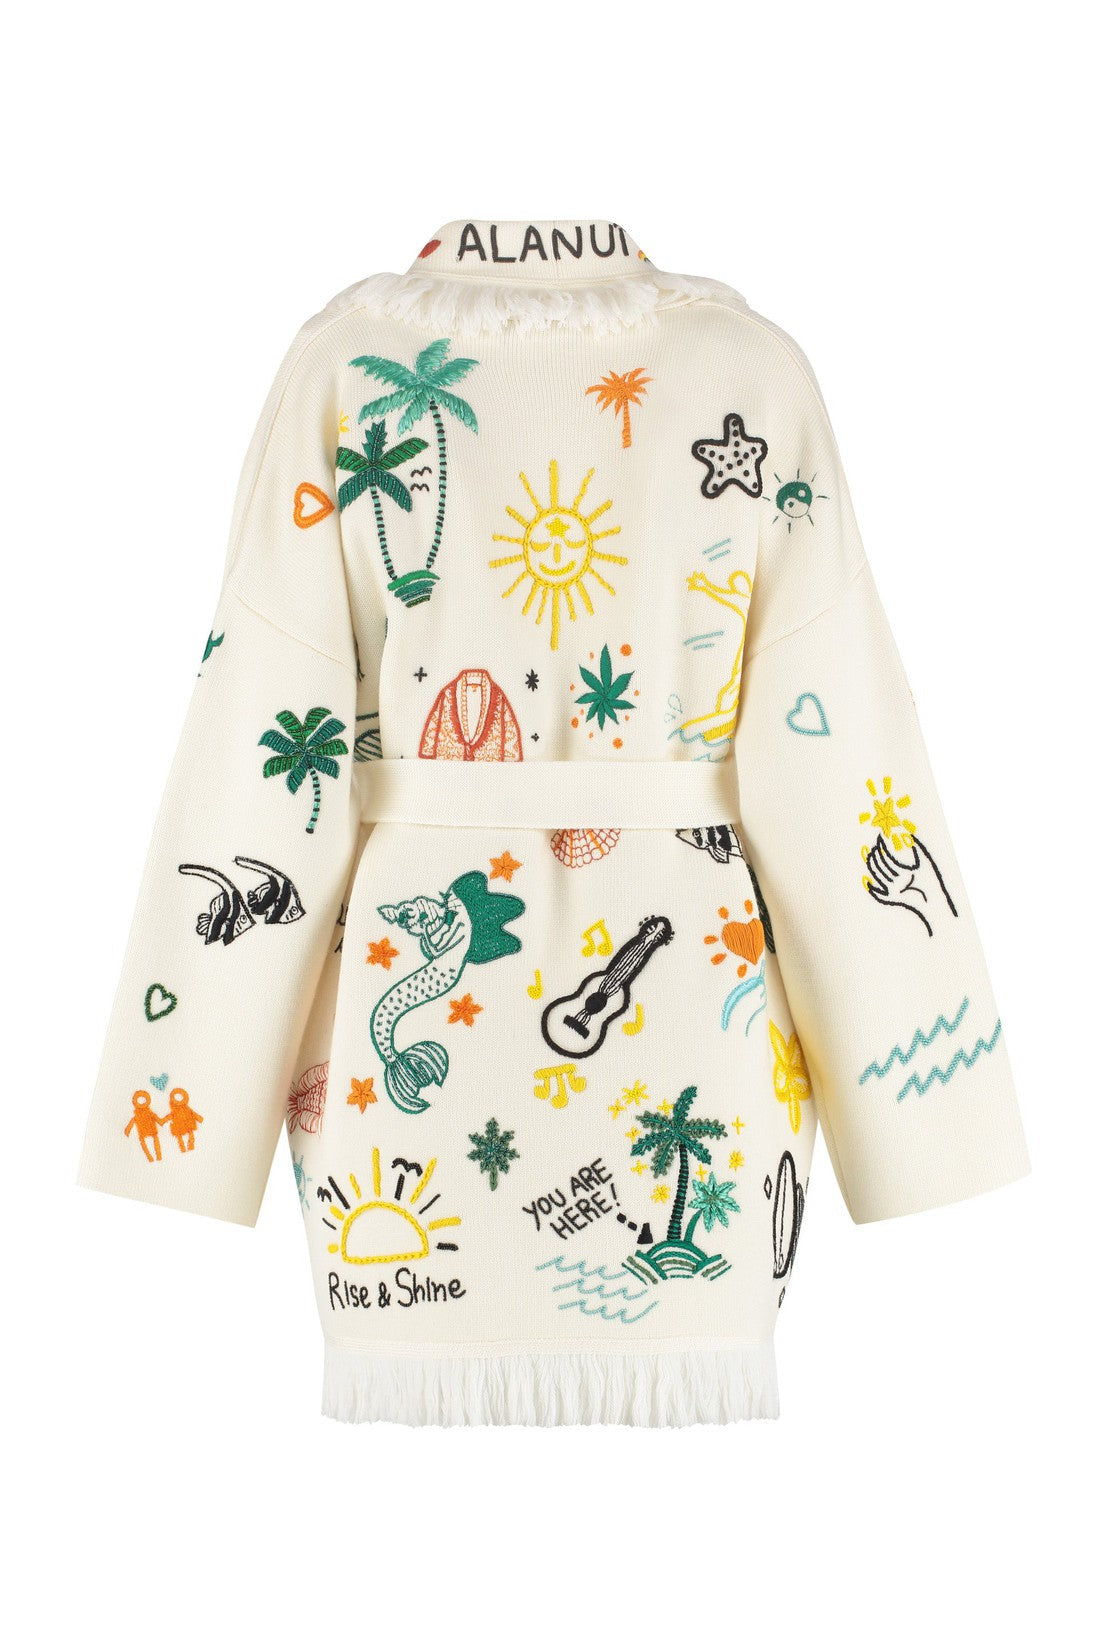 Alanui-OUTLET-SALE-The Sound of the Ocean cardigan-ARCHIVIST